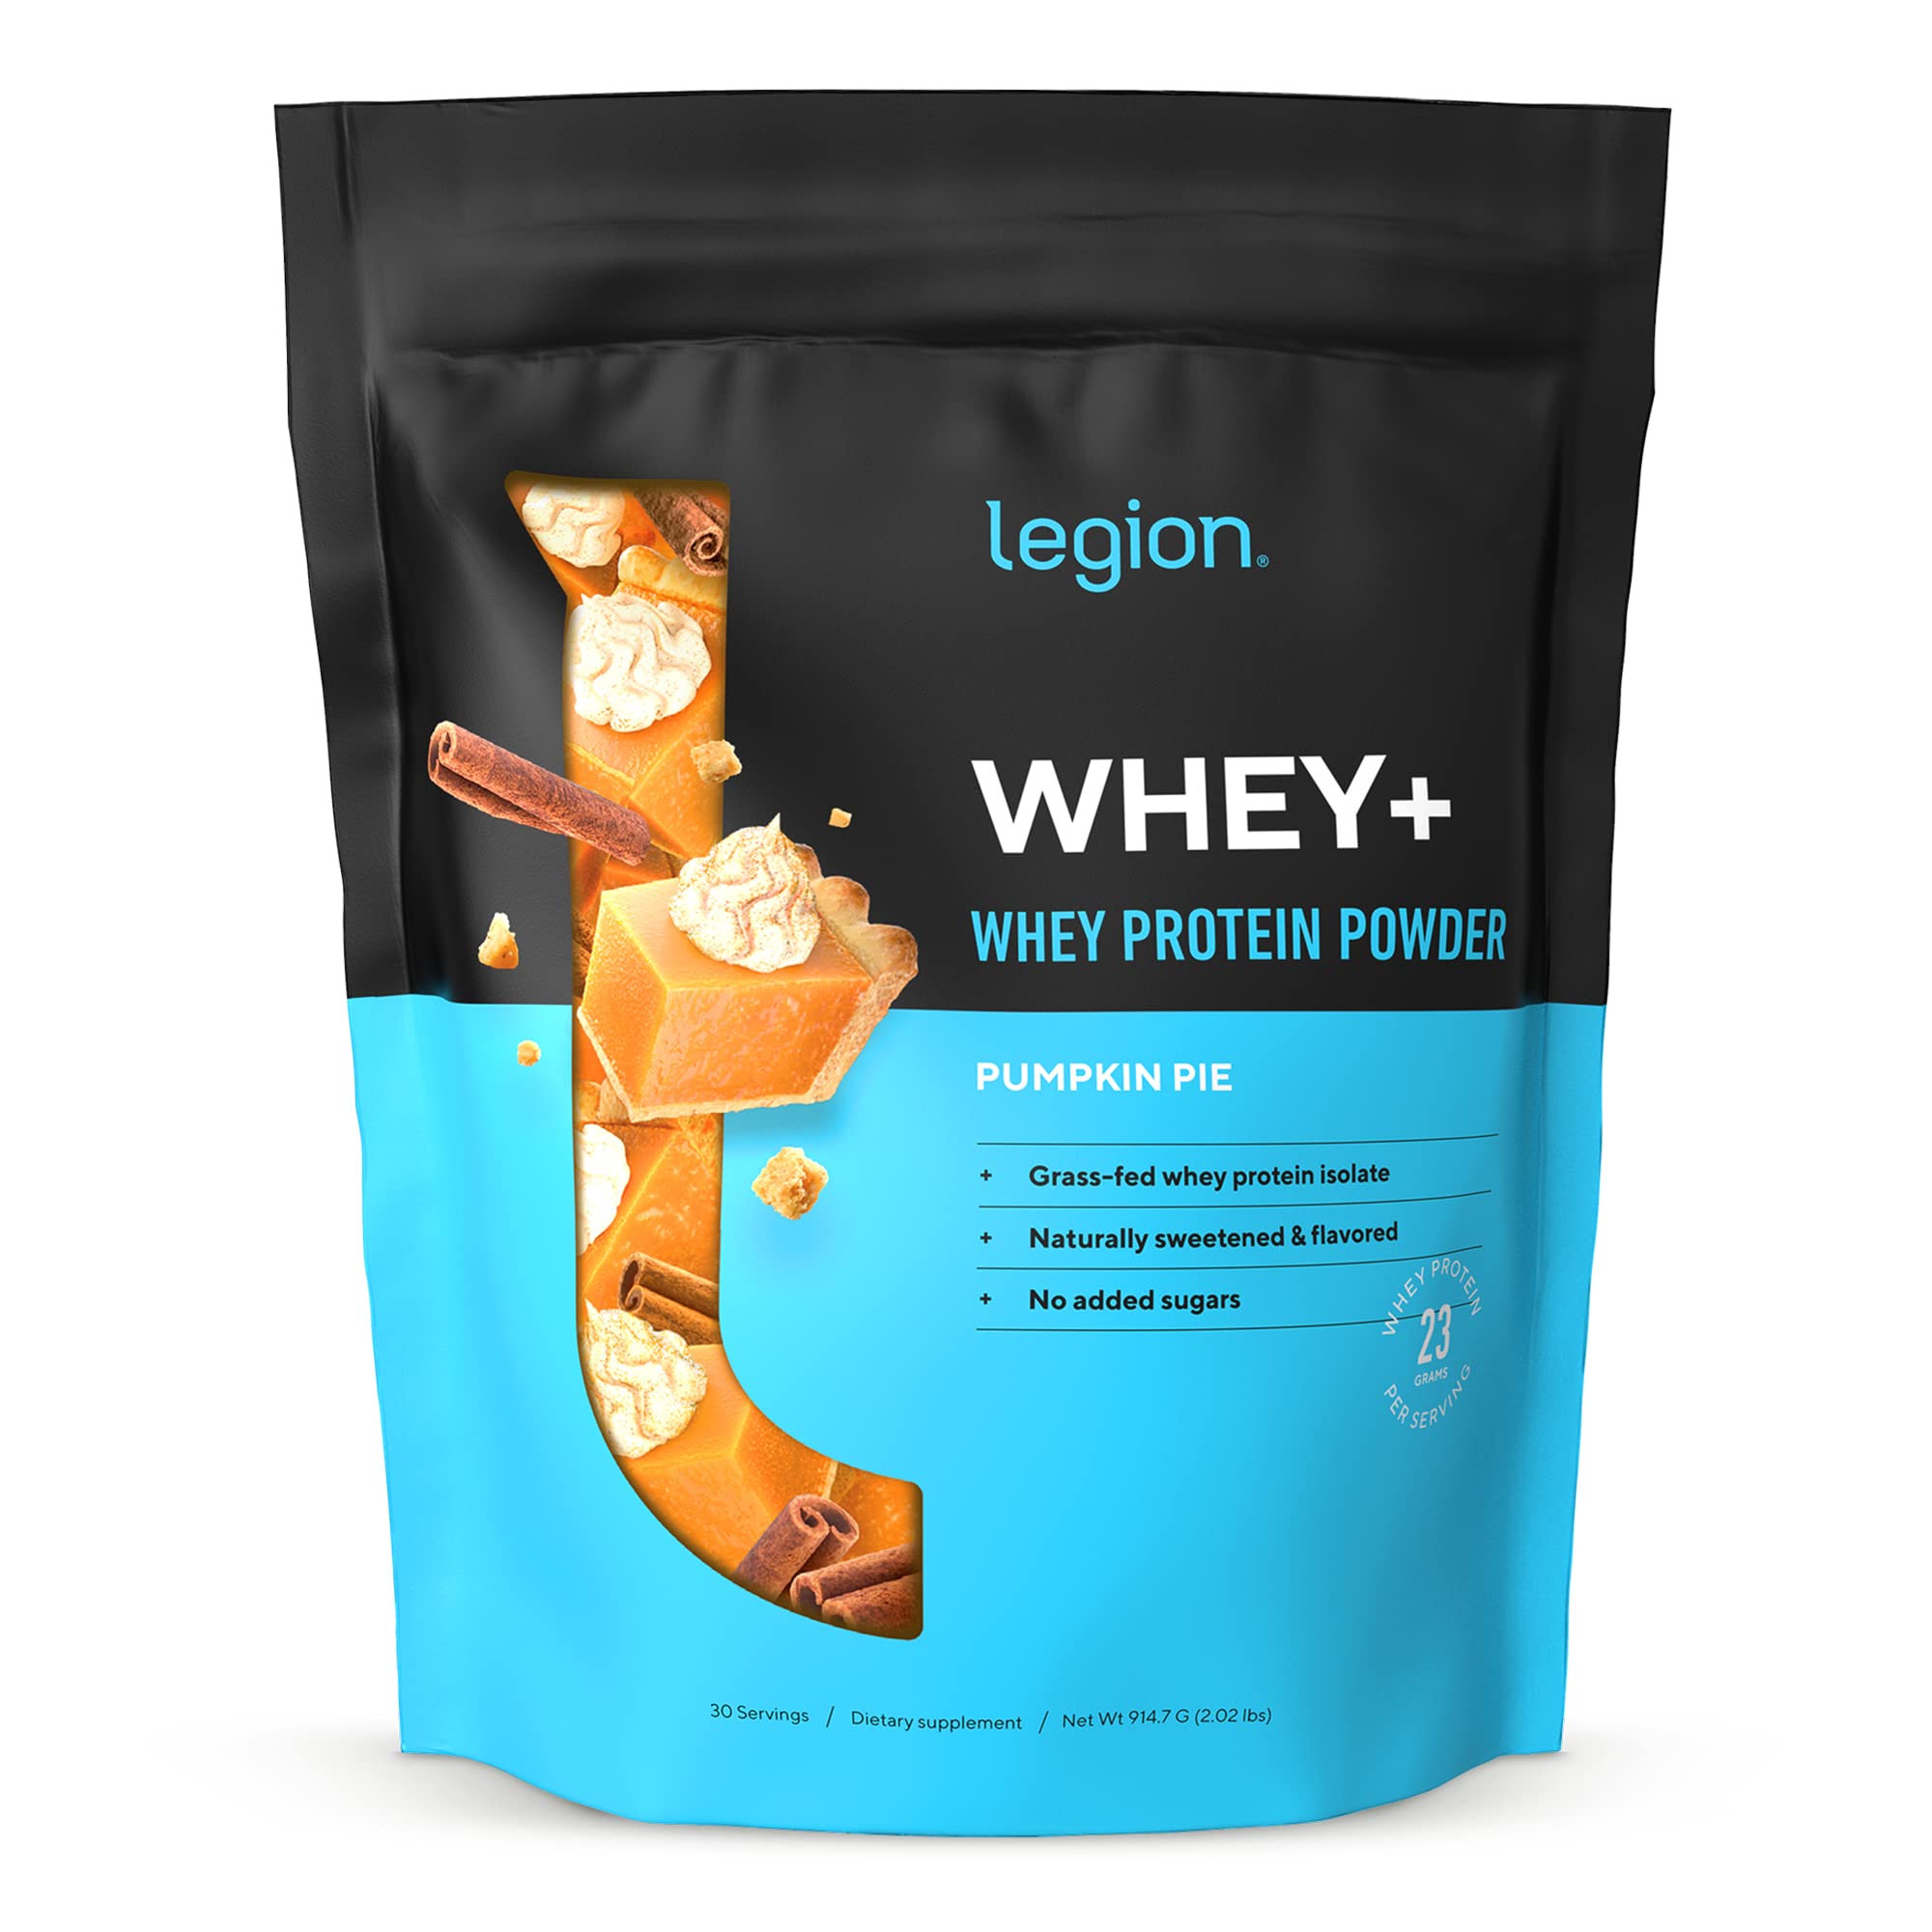 Definitive Legion Whey Isolate Protein Review